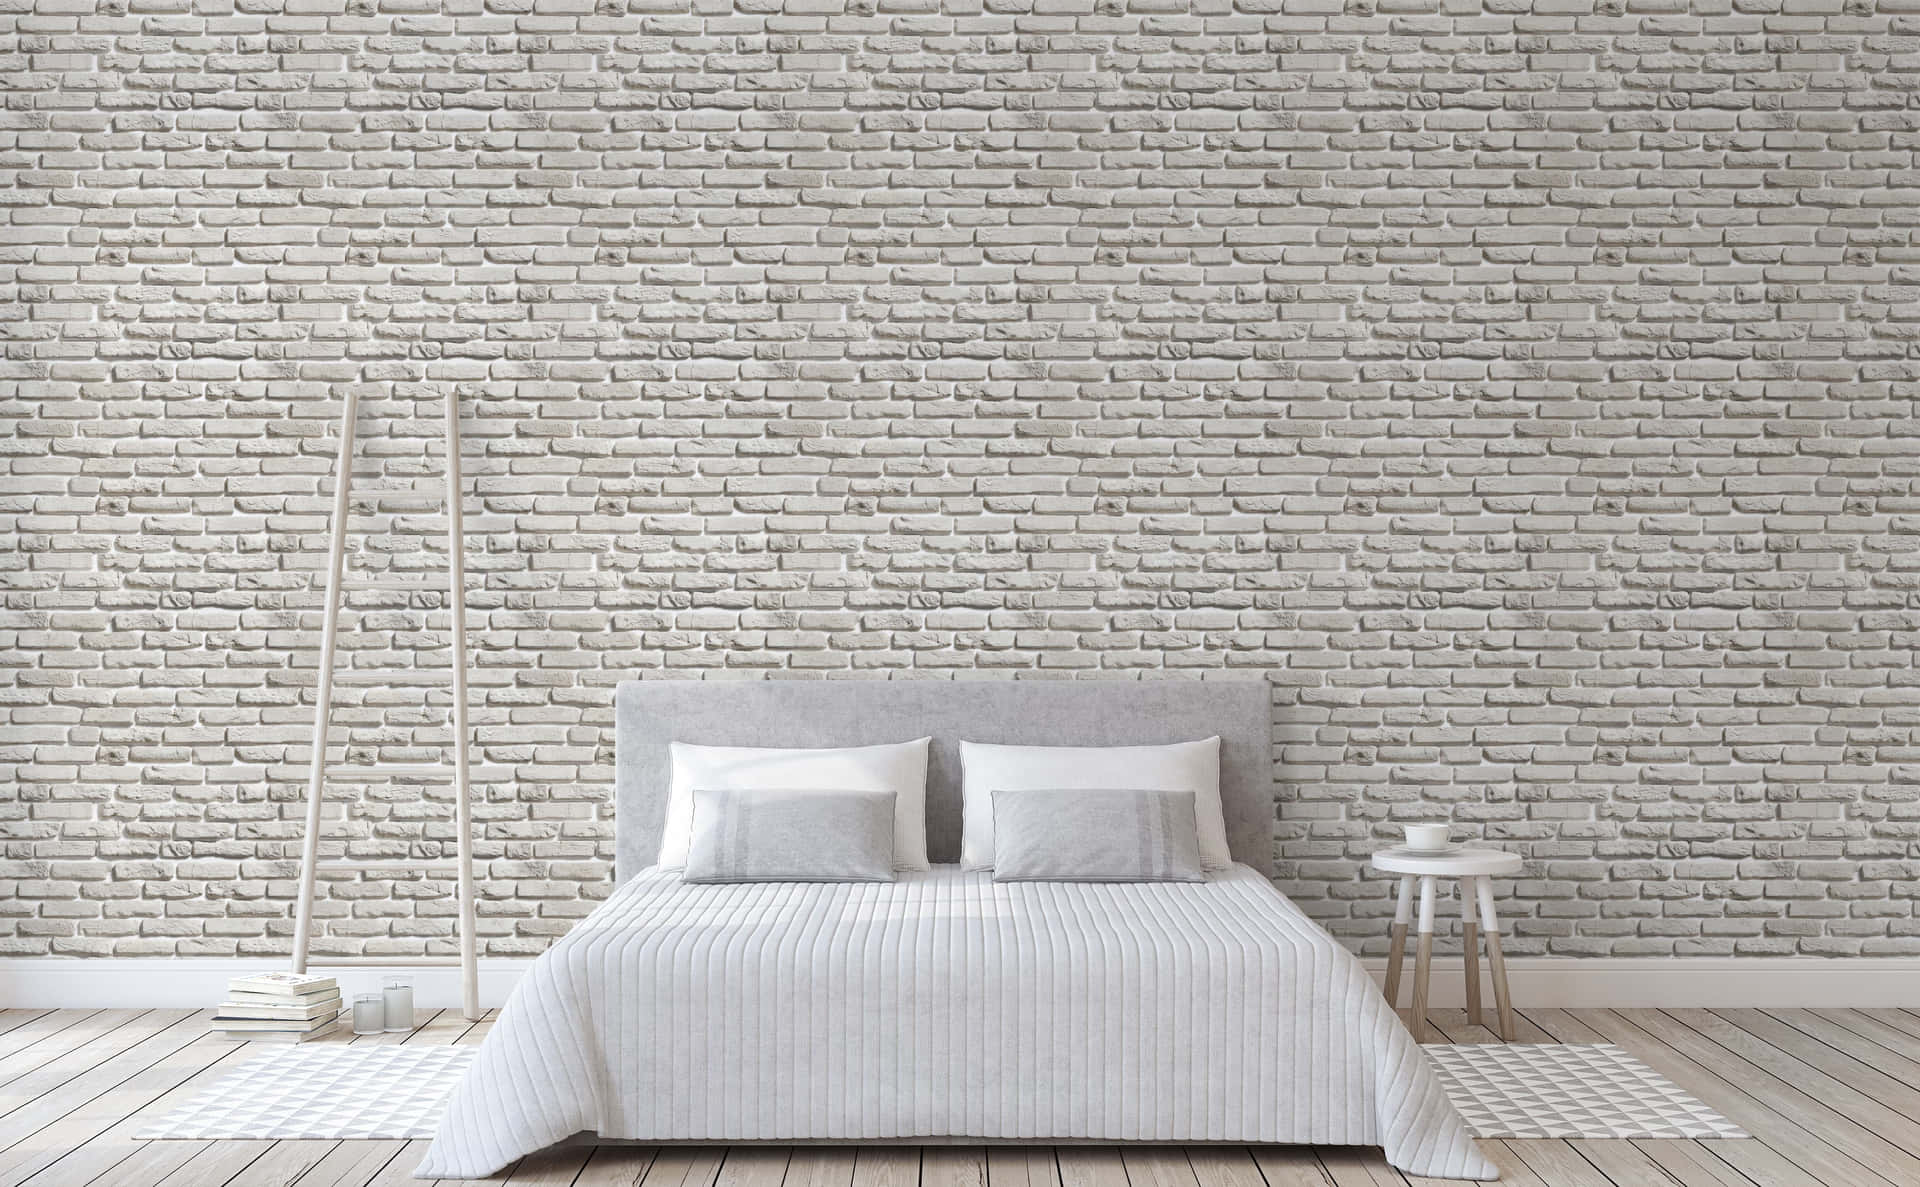 A Bedroom With A White Bed And Brick Wall